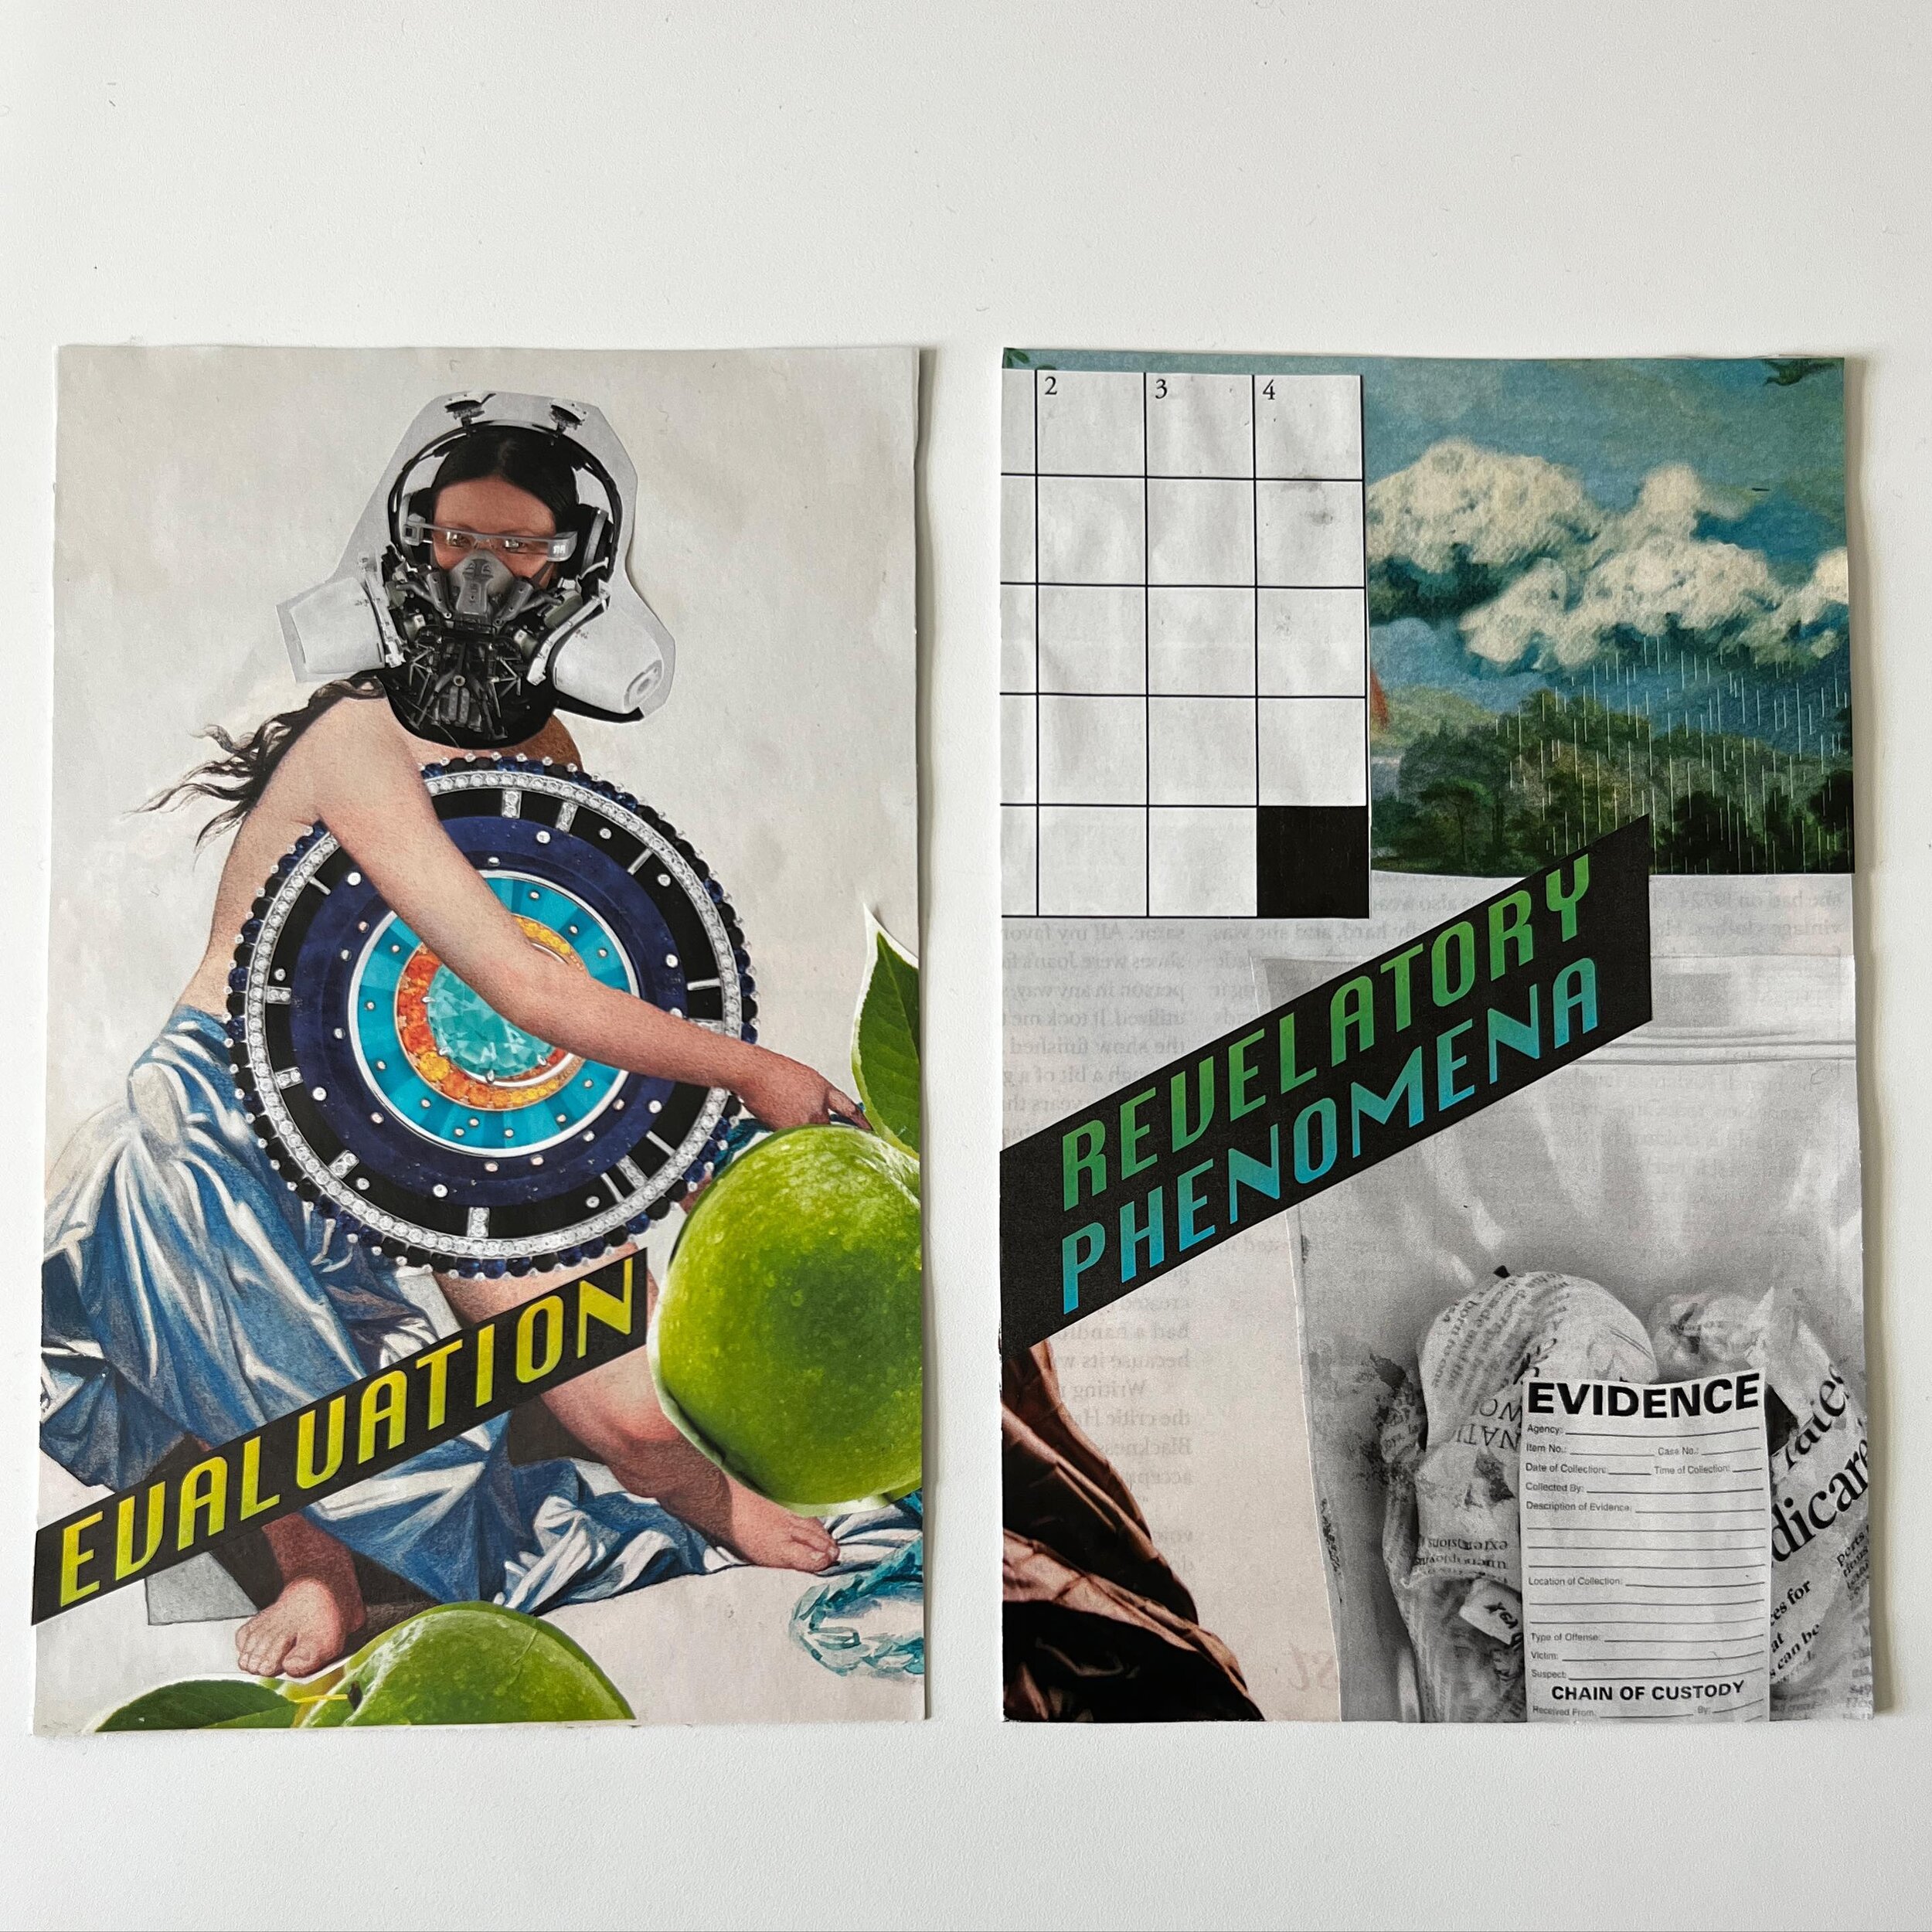 This week&rsquo;s diptych of quick collages from the Have You Tried&hellip;? Groups. We discussed ableism, internalized ableism, and chronic illness burnout. I&rsquo;m really loving using collage right now- having images to choose from feels accessib